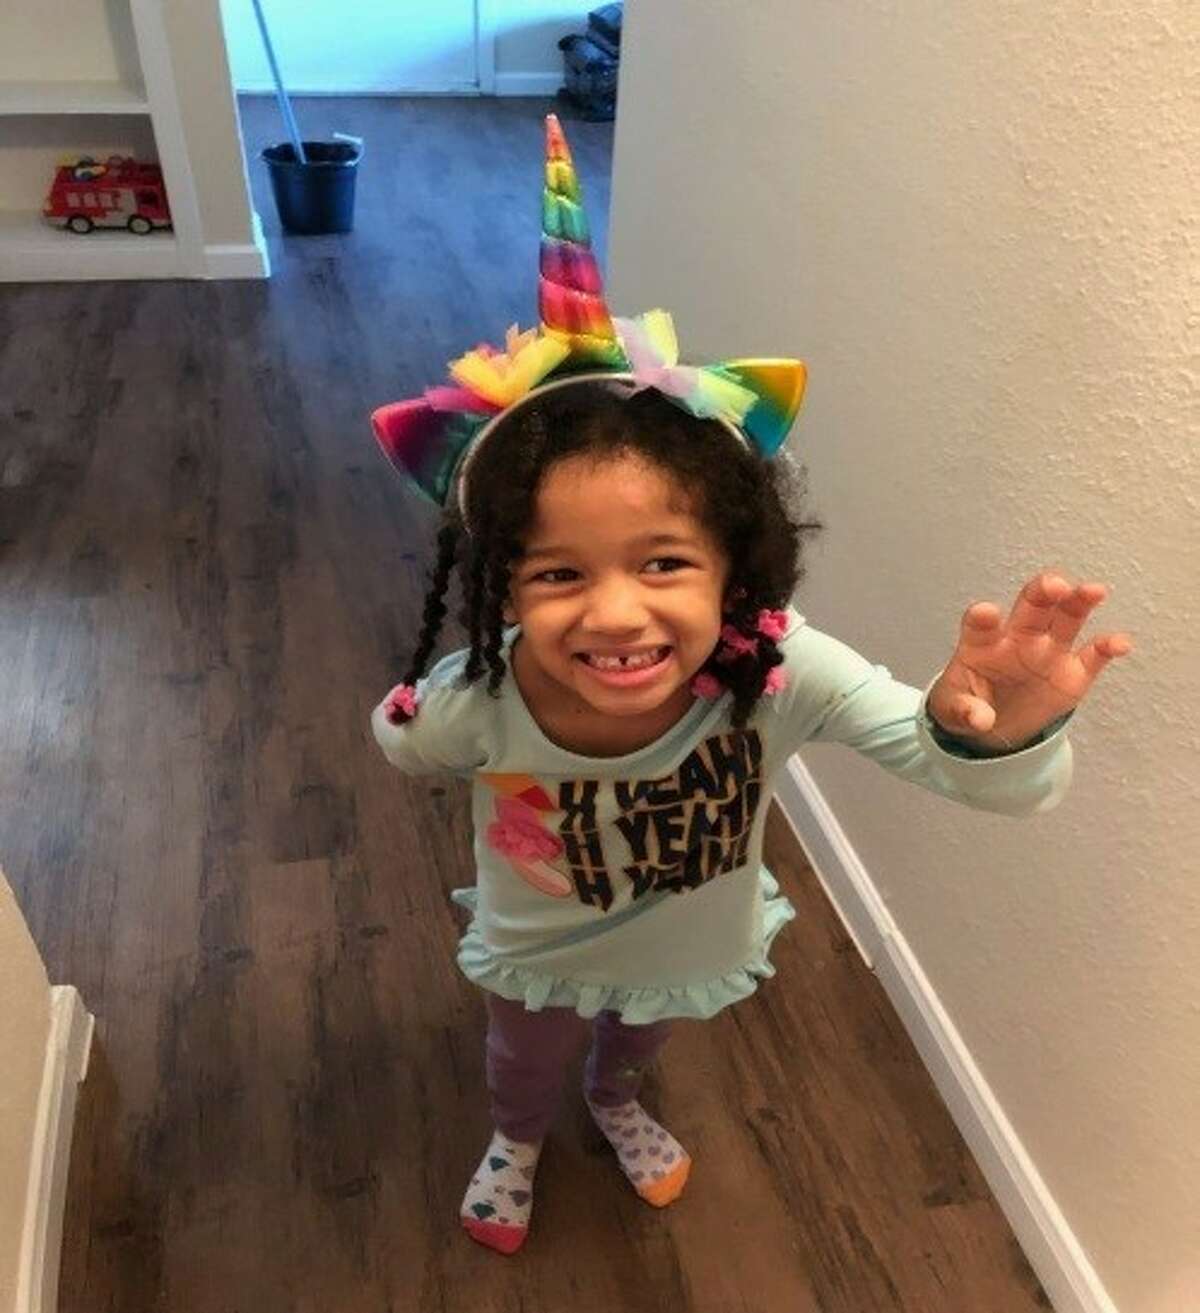 Police are looking for a 5-year-old who was possibly taken on Saturday by three men in north Houston, according to a news release from the Houston Police Department.